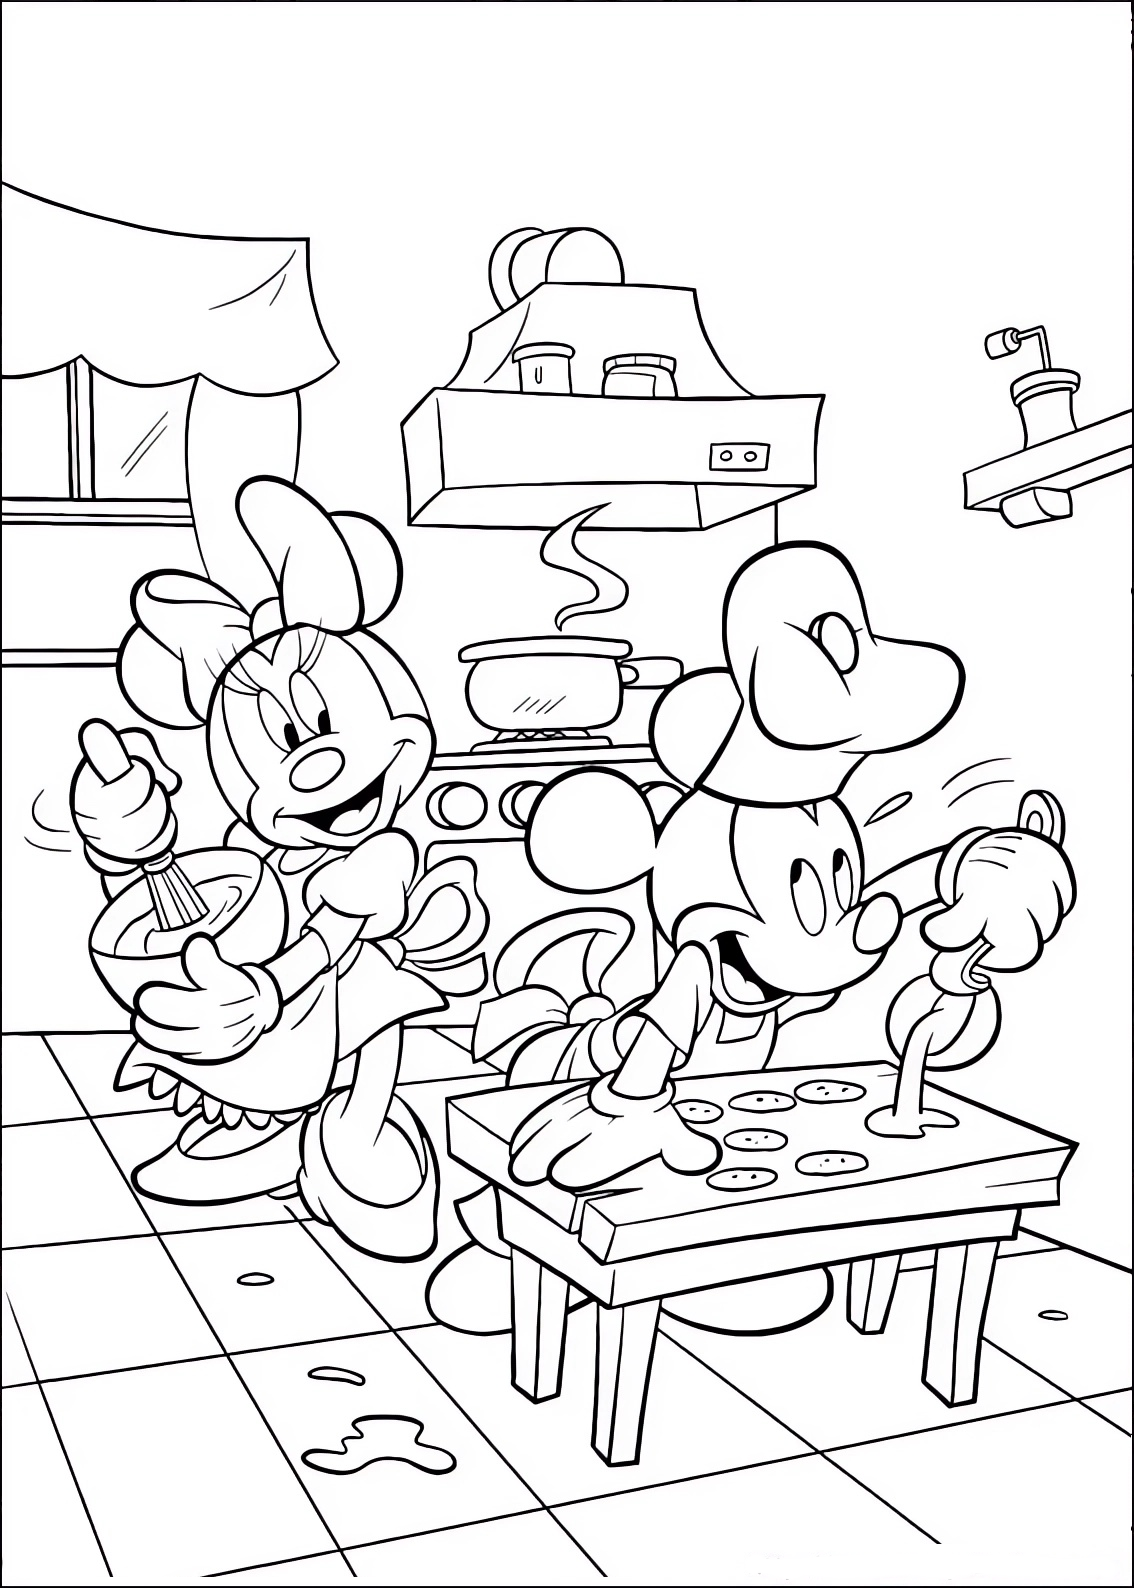 Coloring page of Minnie and Mickey Mouse (Mickey Mouse) pastry chefs preparing desserts